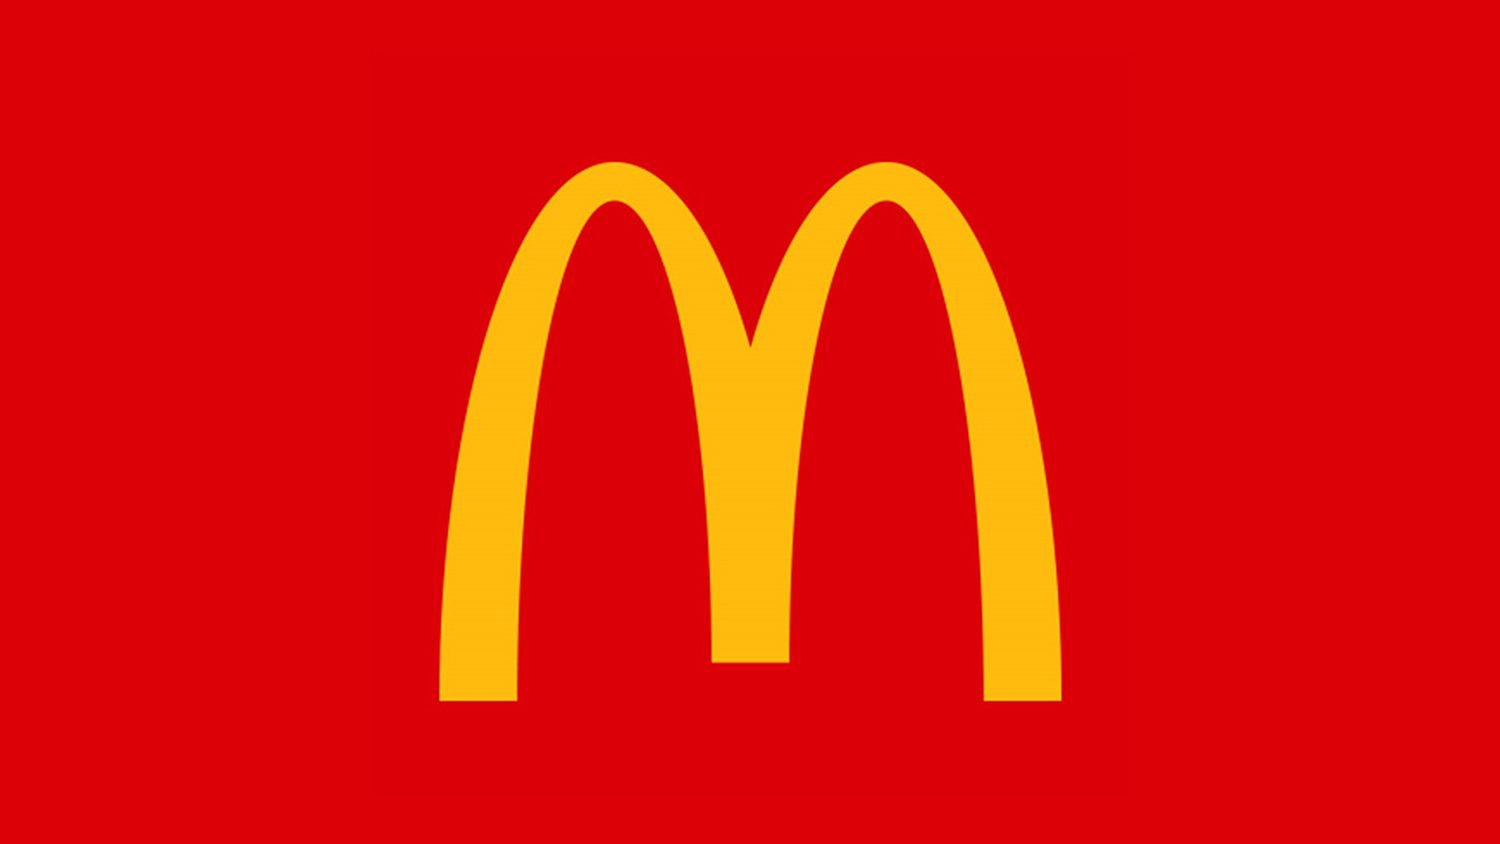 The McSearch is on for McDonalds!